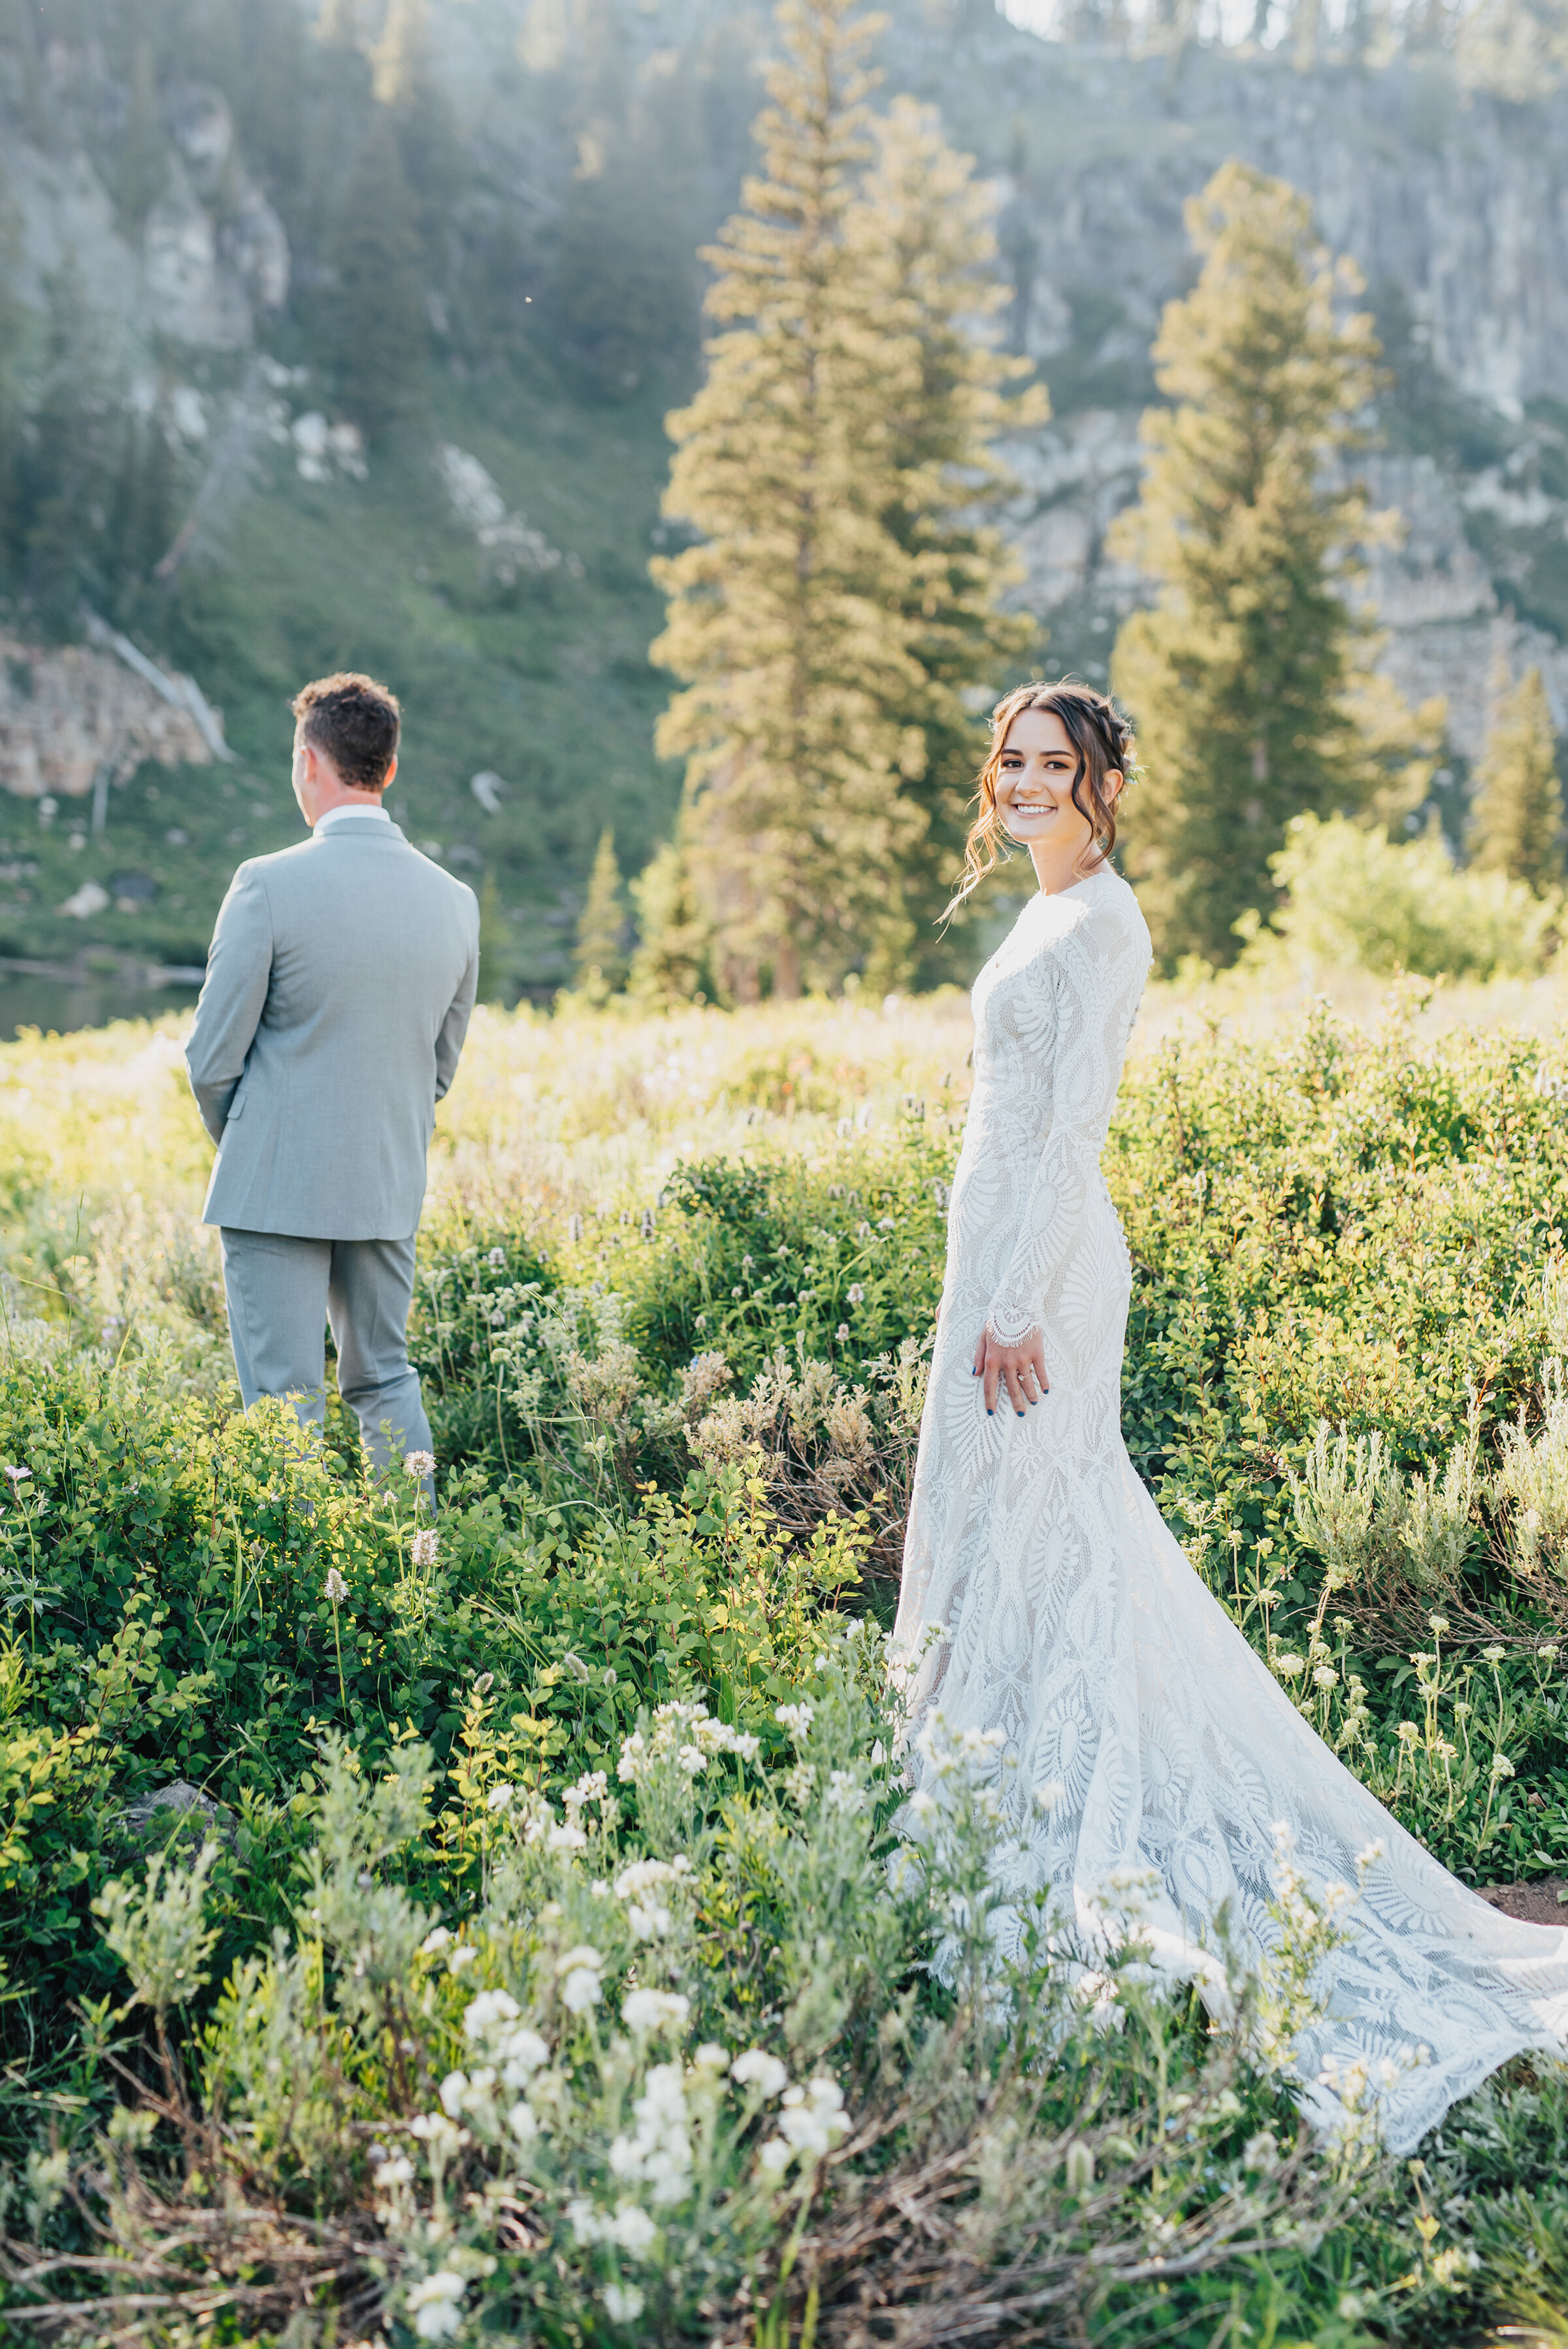 Gorgeous bride and groom during their first look surrounded by lush forest up Logan canyon. Kristi Alyse photography Logan Utah wedding photographer forest nature dreamy formals Logan canyon Tony Grove scenic bridals Northern Utah photographer Utah brides bride and groom Cache Valley #kristialysephotography #loganutahphotographer #tonygrove #logancanyon #utahweddingphotographer #bridals #formals #wildflowers #northernutah #utahbrides